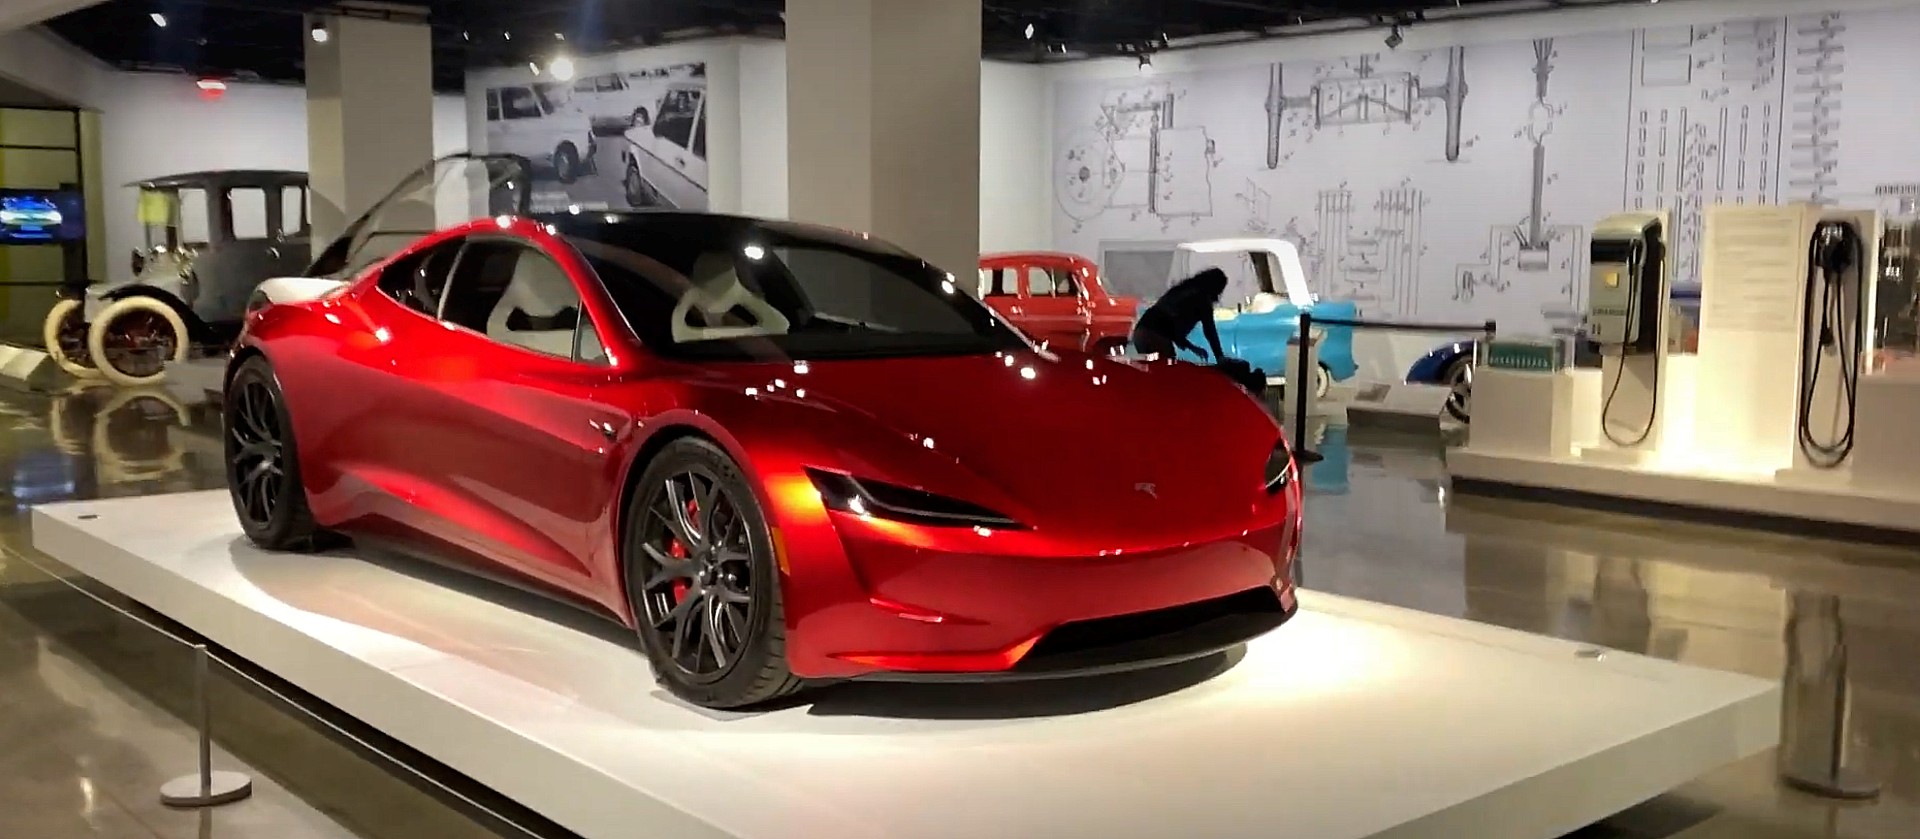 Tesla Roadster gets an update from Elon Musk and you’ll be waiting